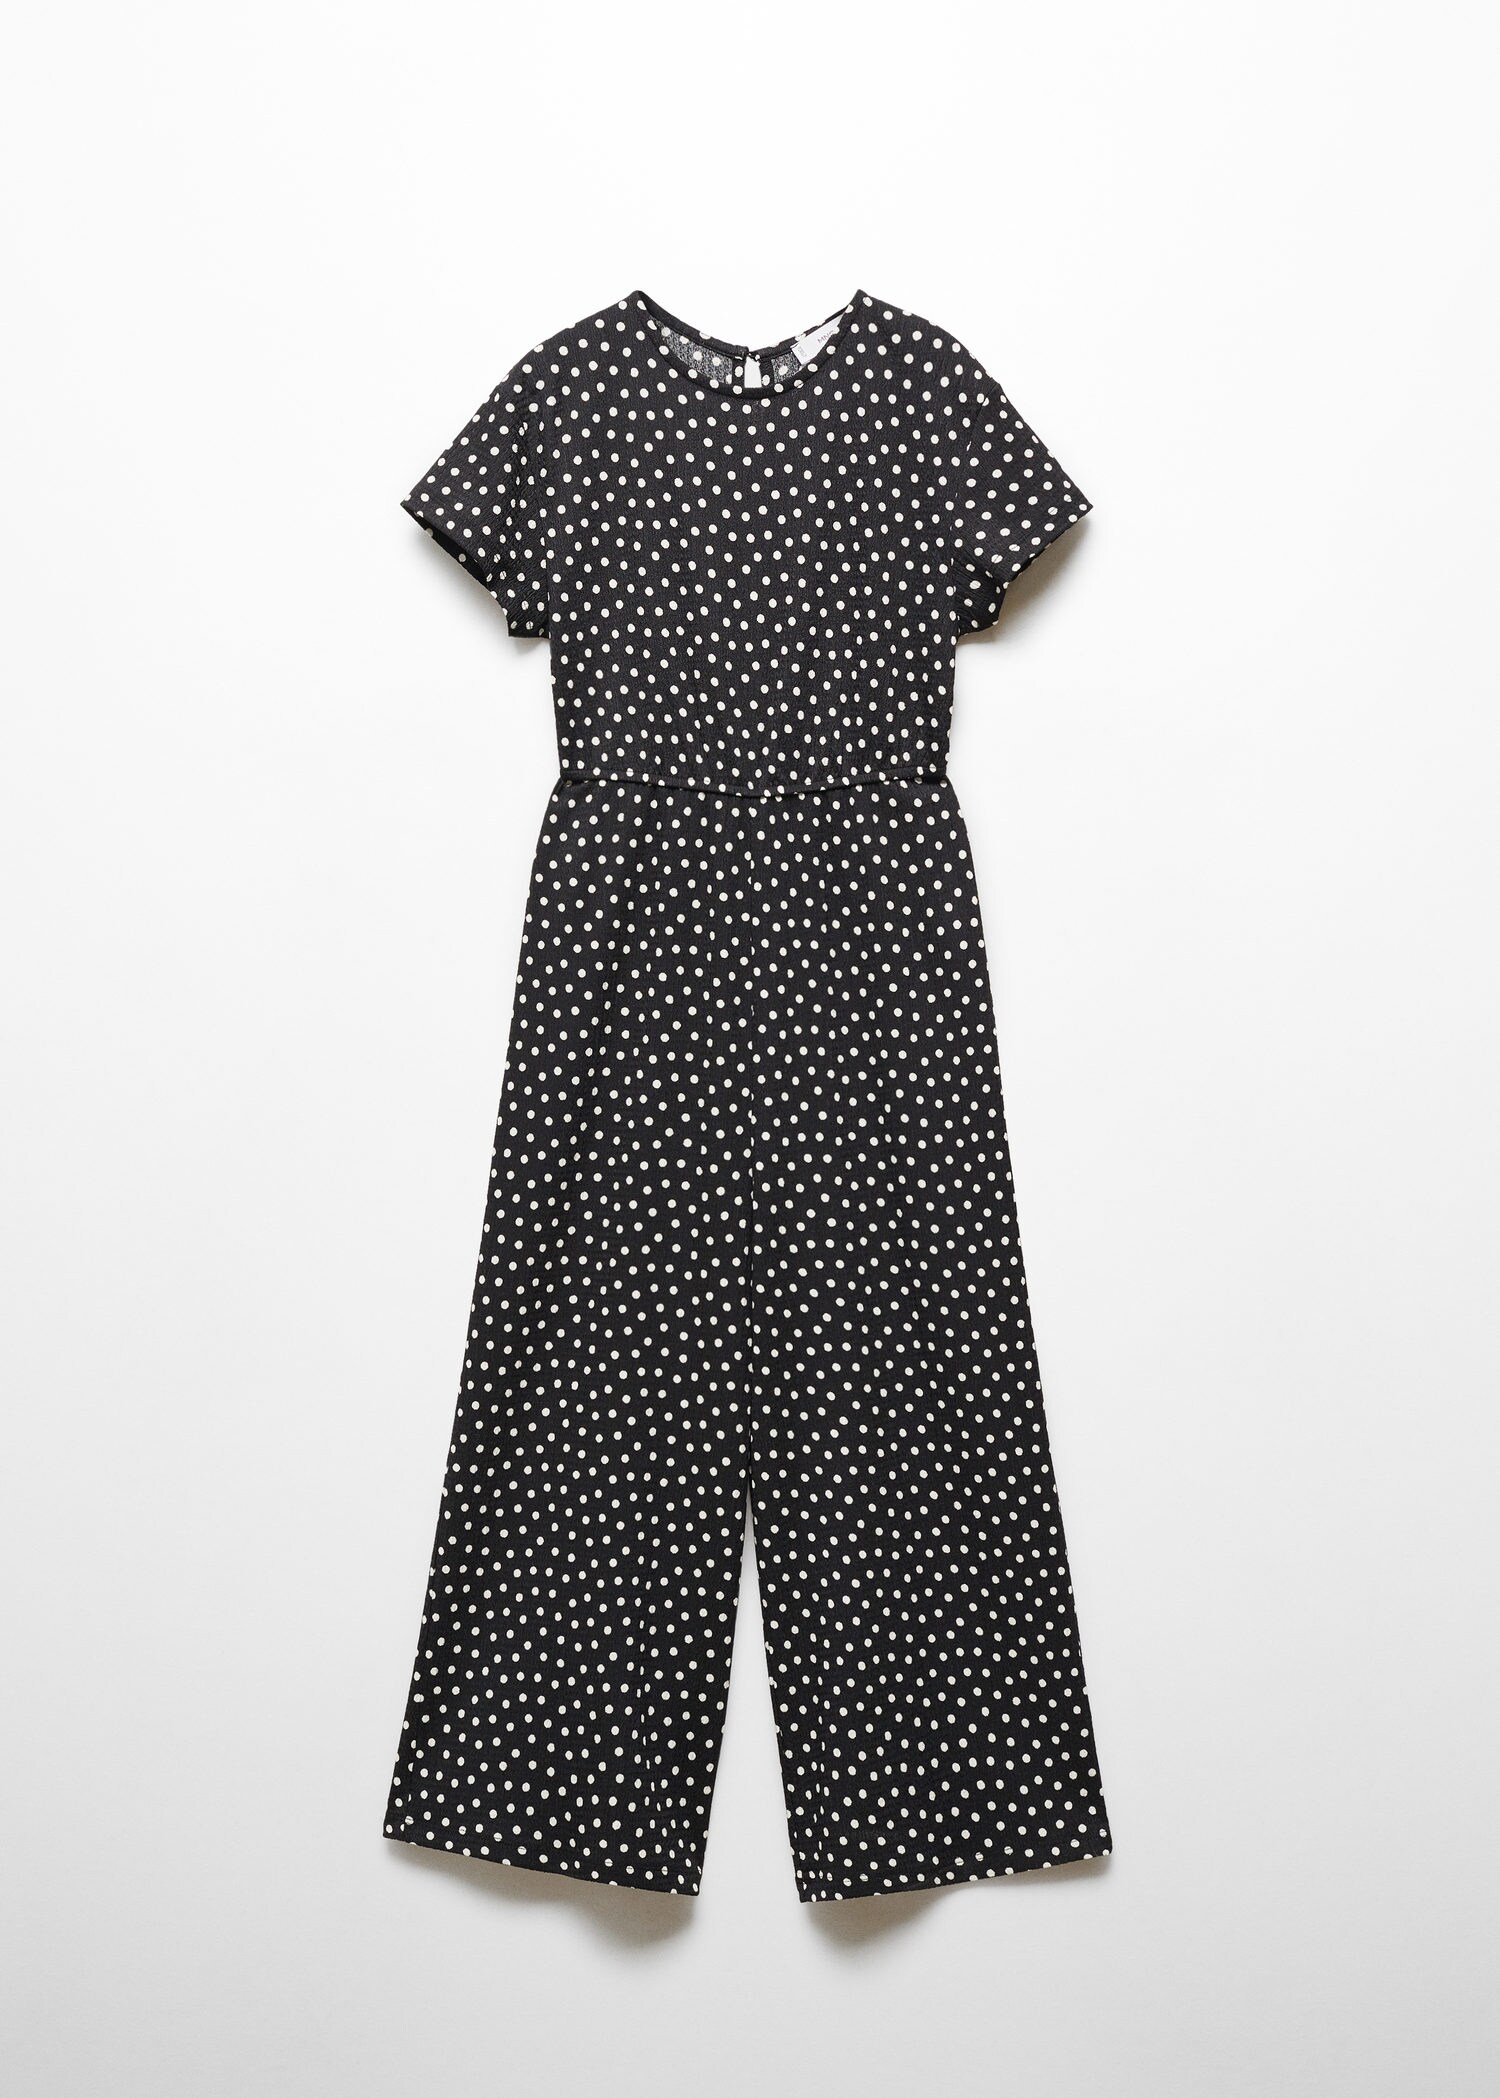 Buy short jumpsuit for women full sleeves in India @ Limeroad